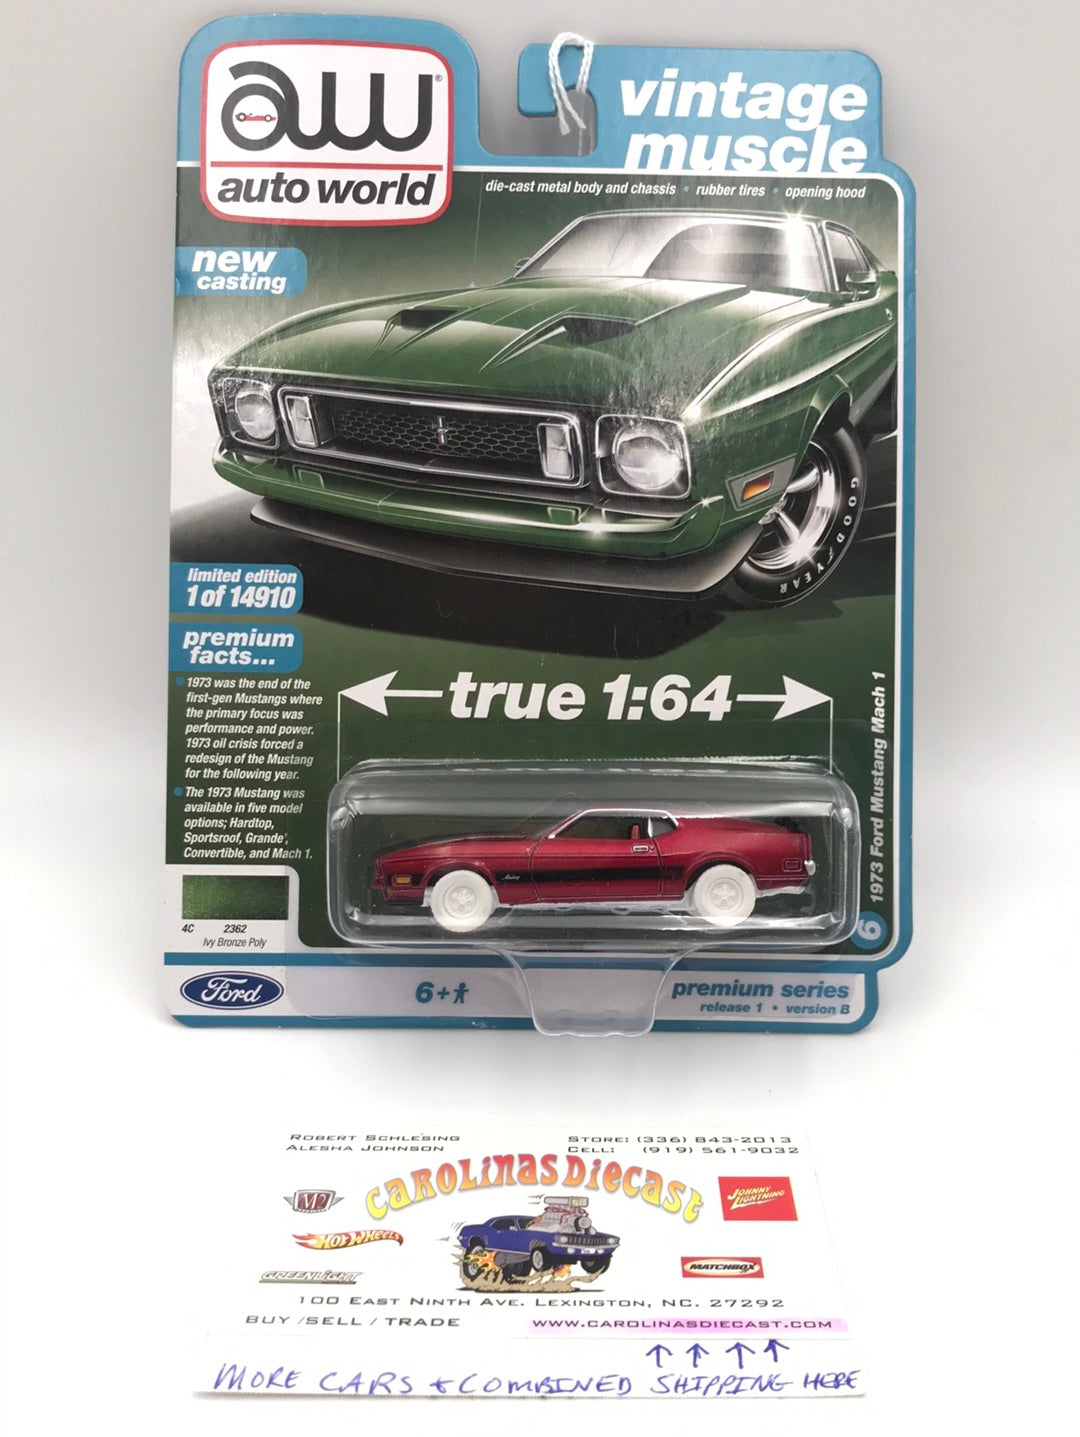 Auto world Vintage Muscle 1973 Ford Mustang Mach 1 ultra red chase